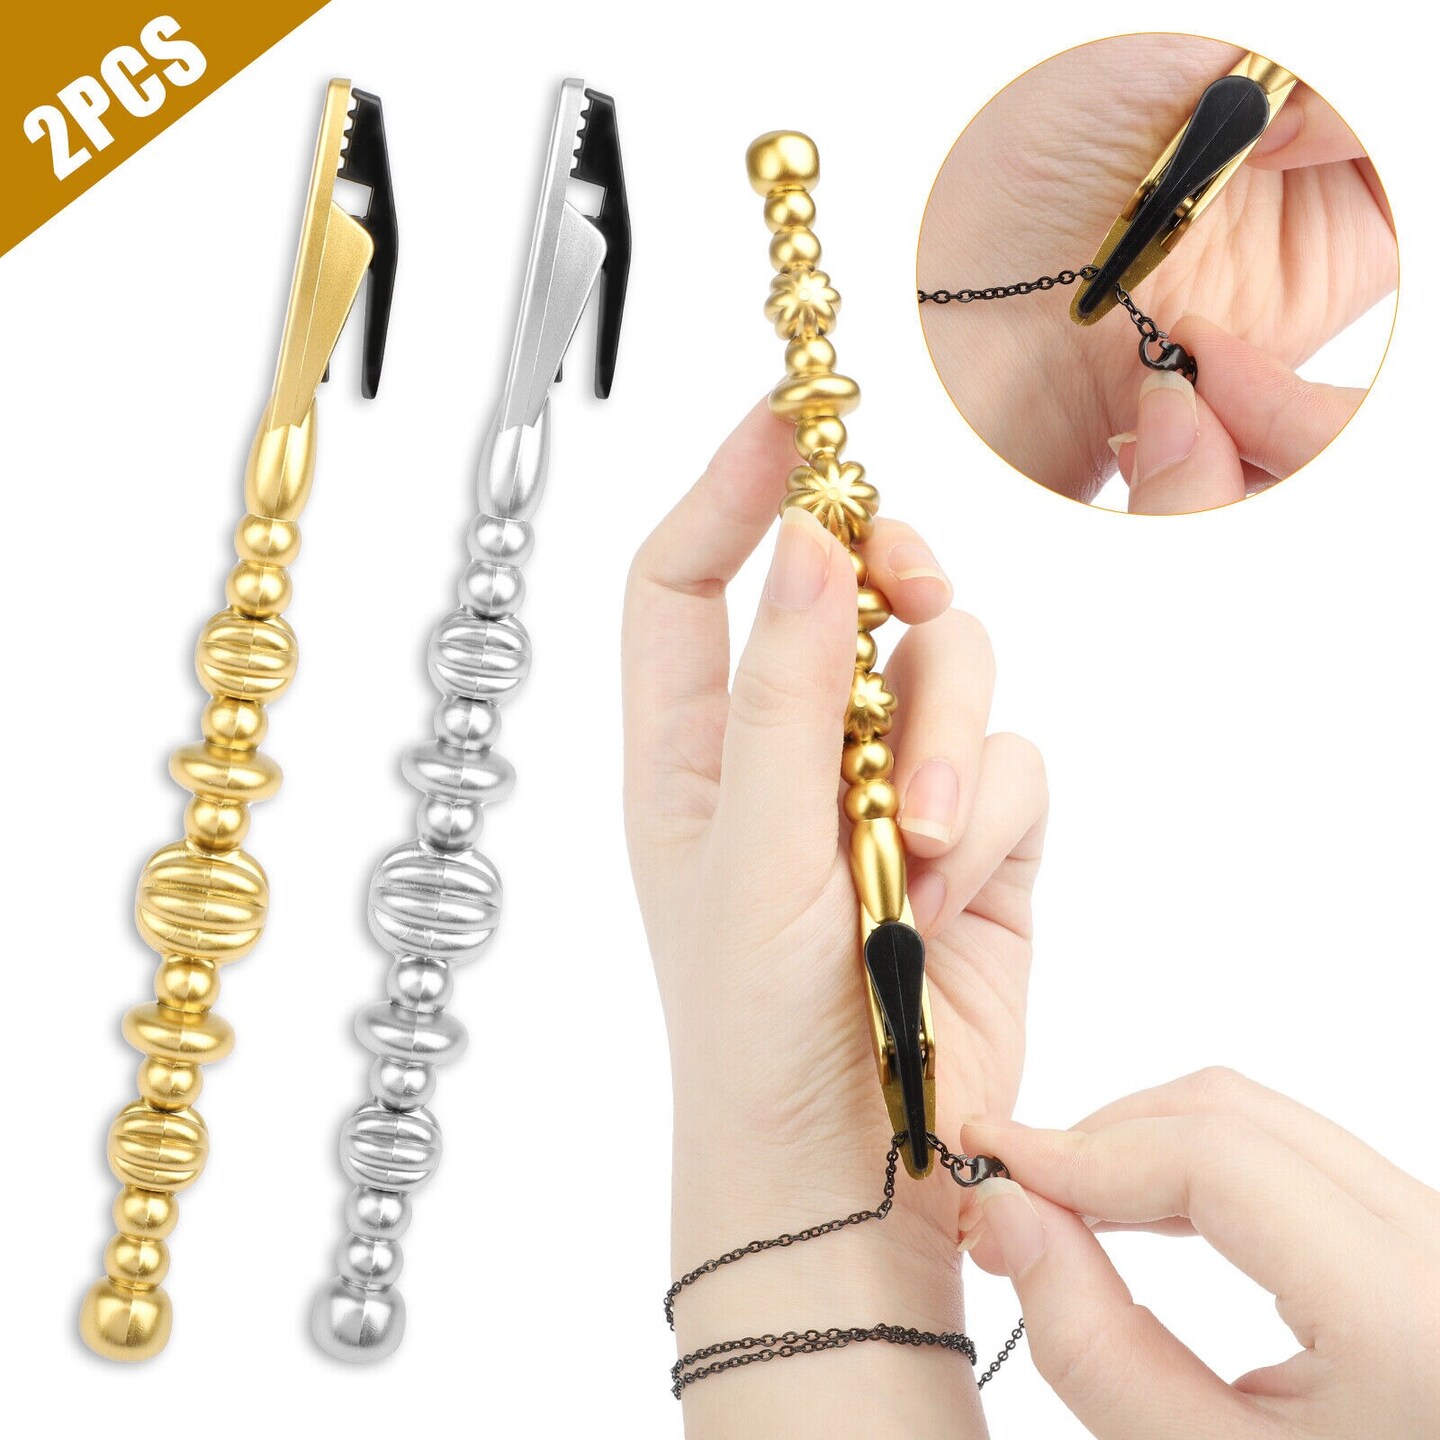 Bracelet Buddy Tool Jewelry Helper Quickly Fastening Aid Dressing For Necklaces